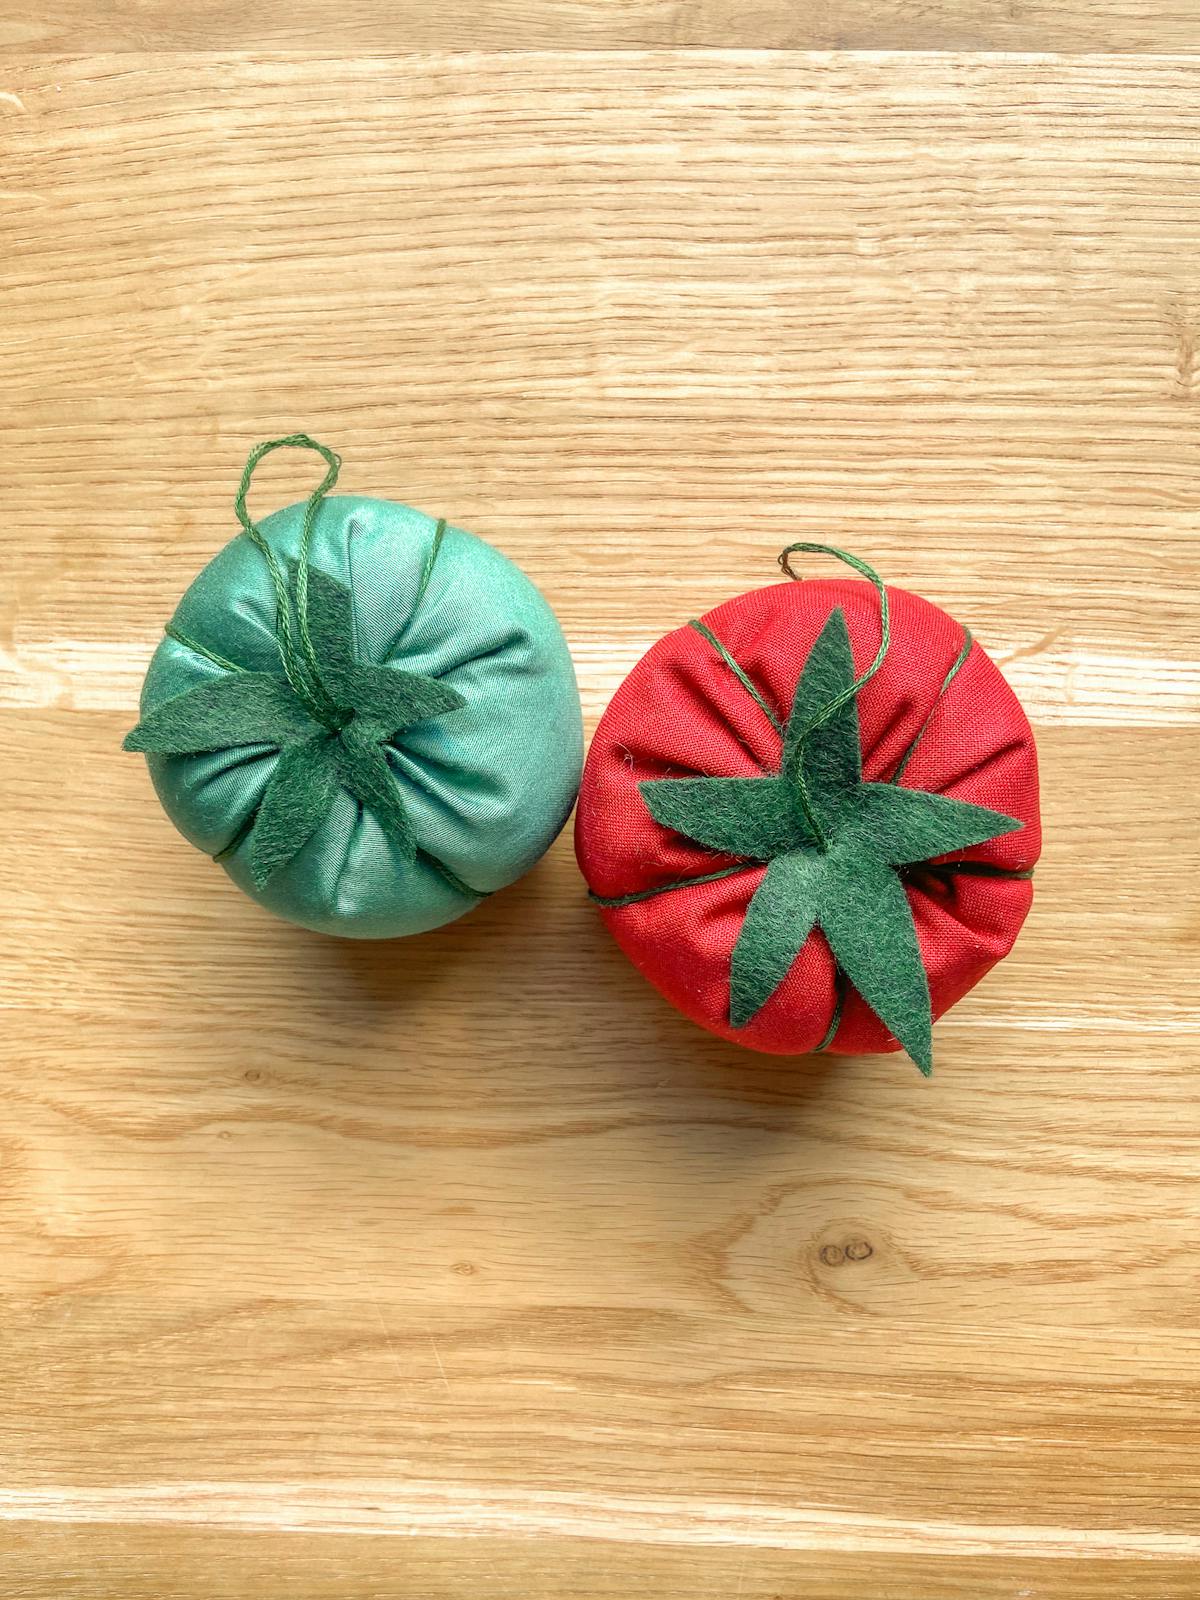  Finished tomato pin cushions in green and red on a wooden table